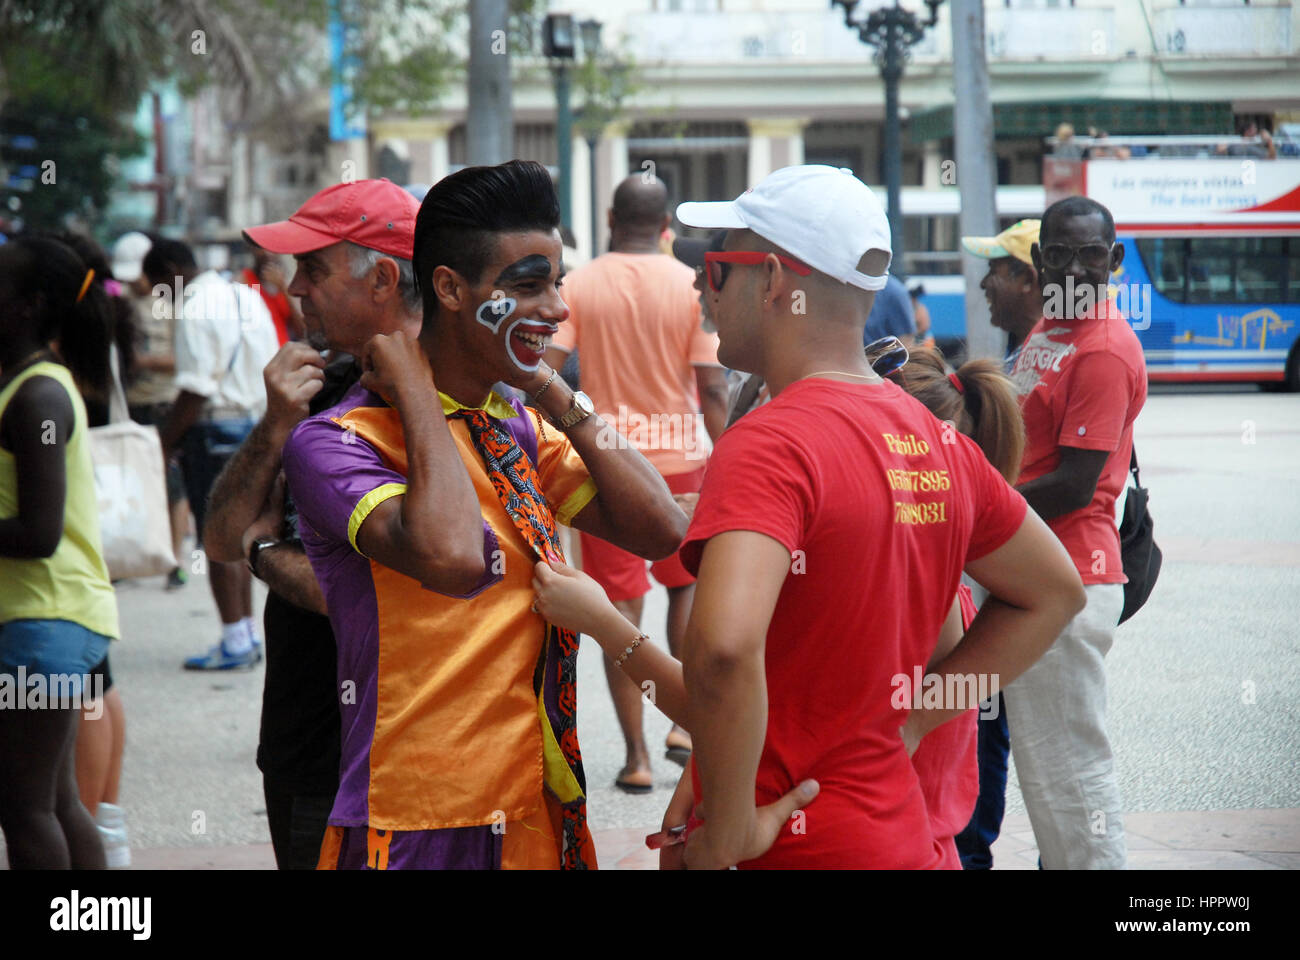 Clown getting ready to entertain people in the Parque Central, Havana, Cuba. Stock Photo